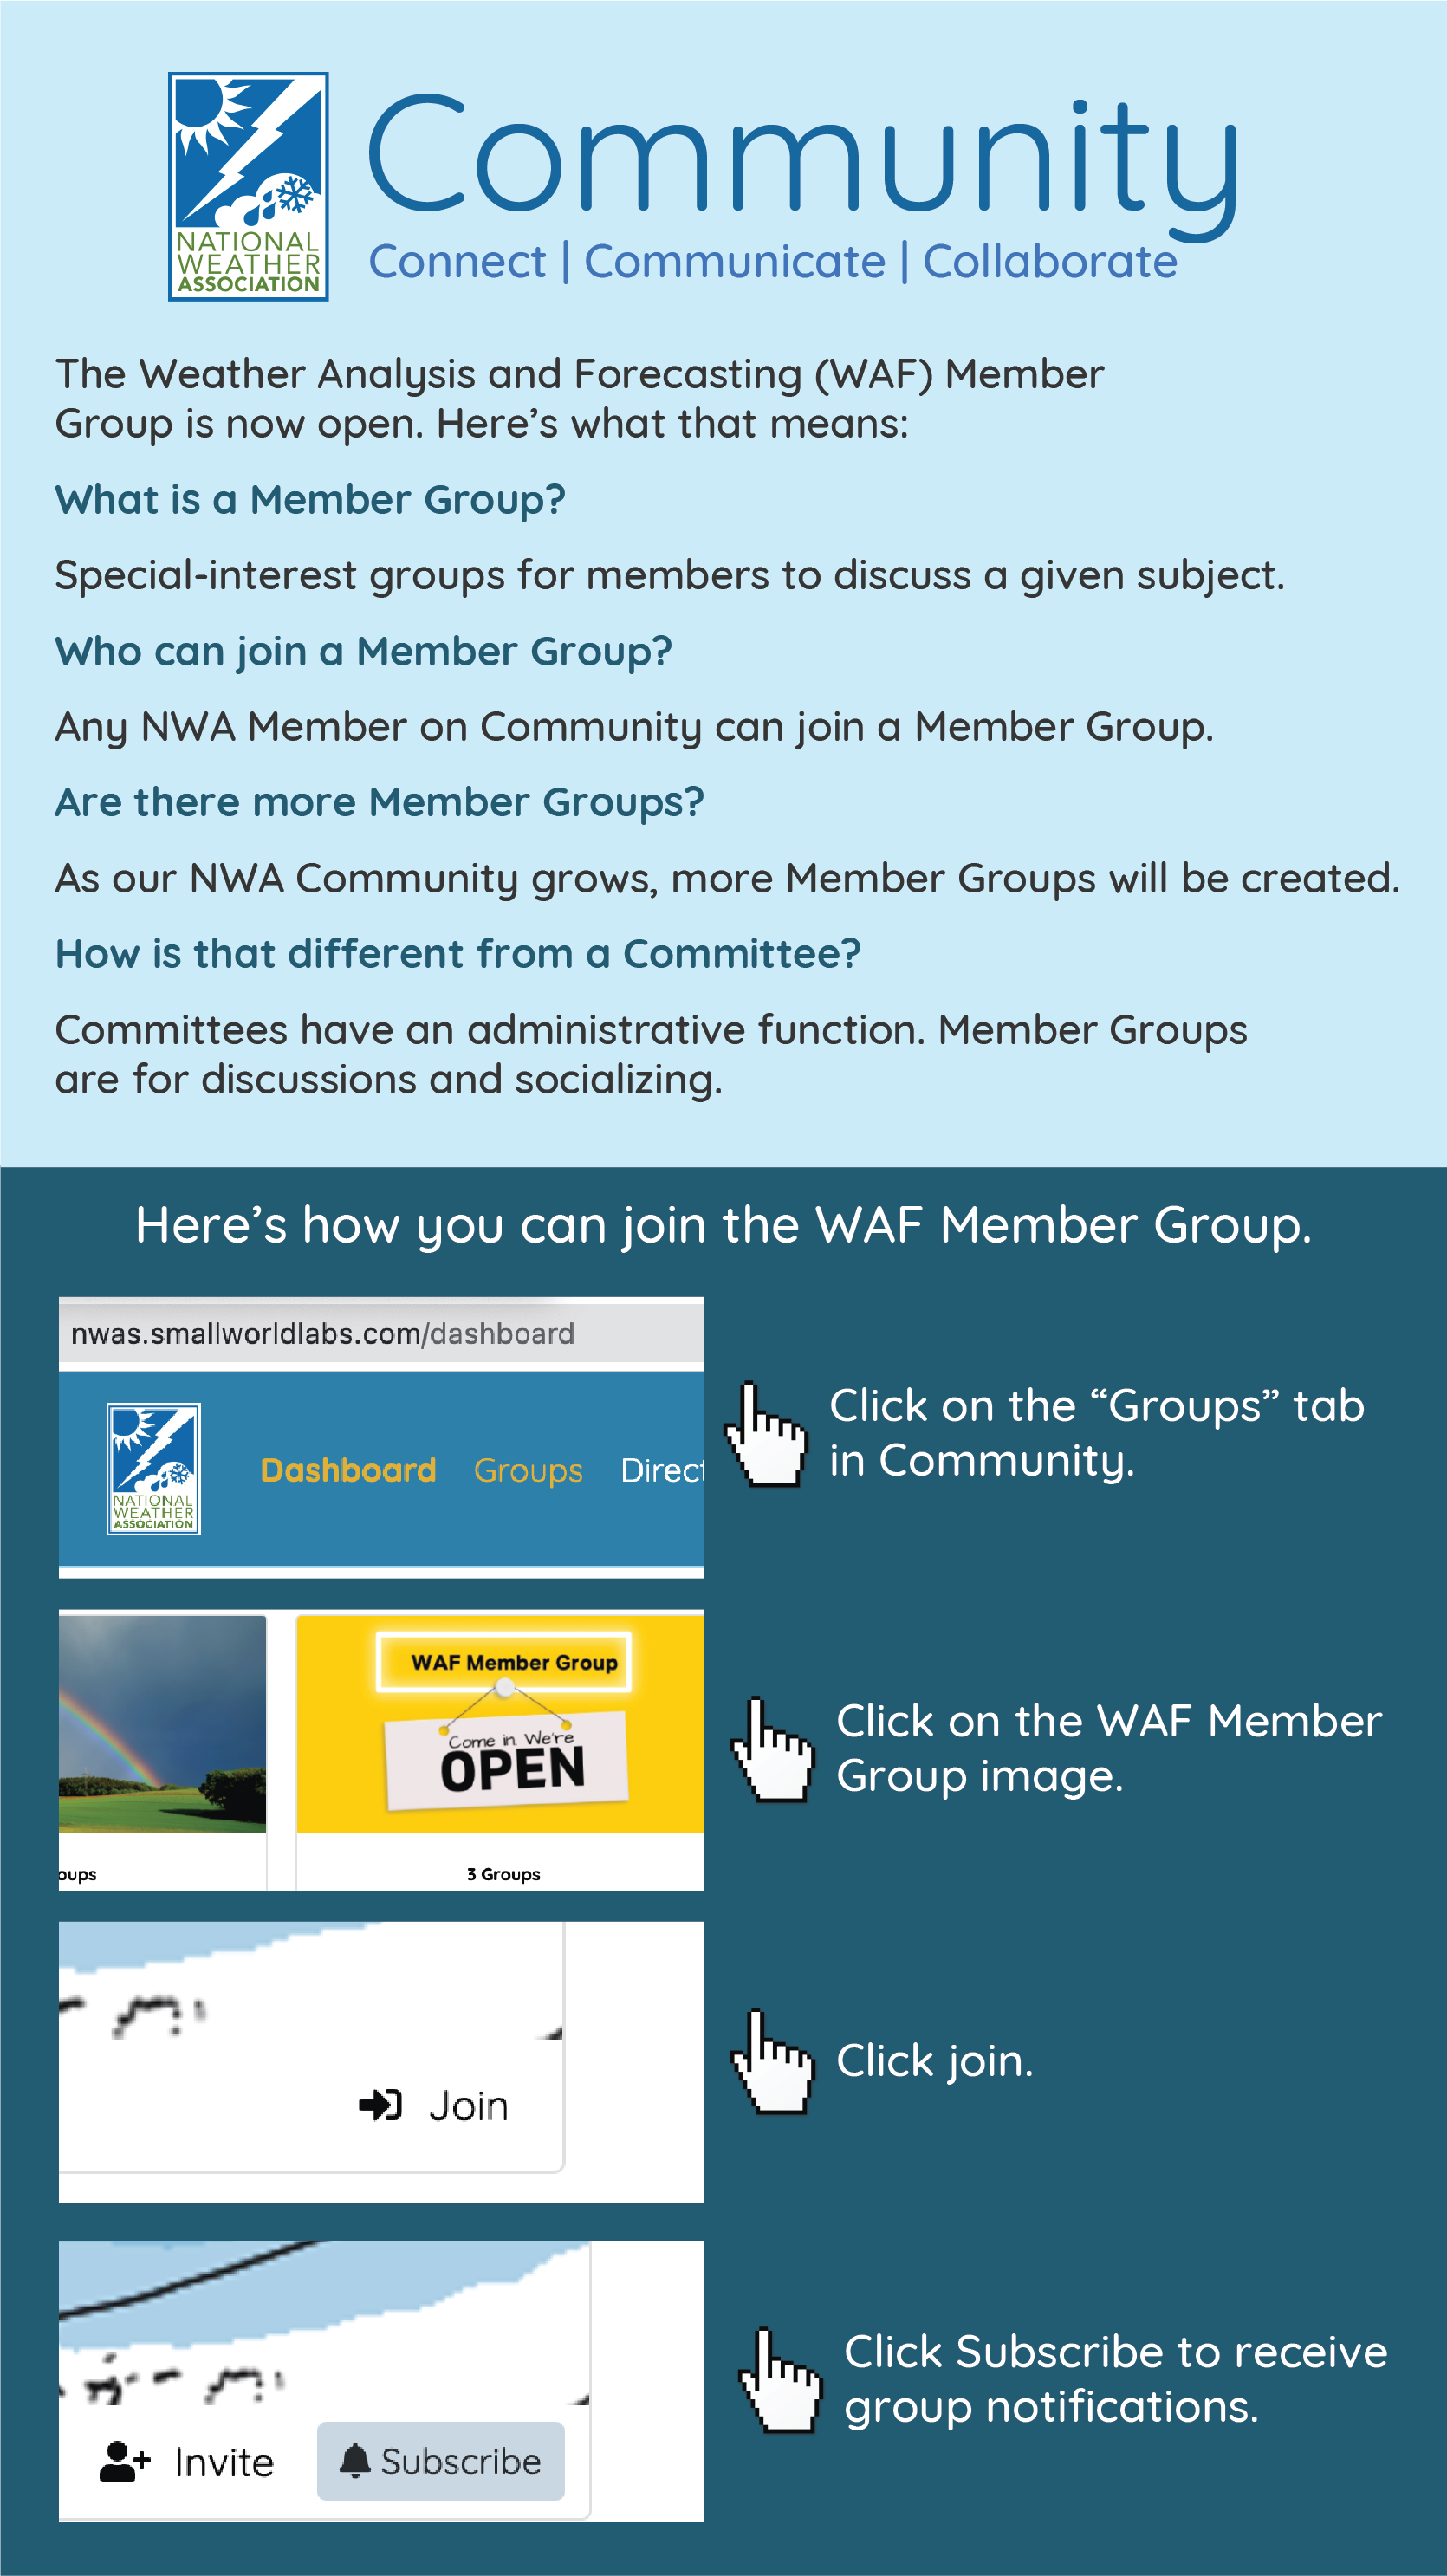 The Weather Analysis and Forecasting (WAF) Member Group is now open. Here's what that means: What is a Member Group? Special-interest groups for members to discuss a given subject. Who can join a Member Group? Any NWA Member on Community can join a Member Group. Are there more Member Groups? As our NWA Community grows, more Member Groups will be created. How is that different from a Committee? Committees have an administrative function. Member Groups are for discussions and socializing.